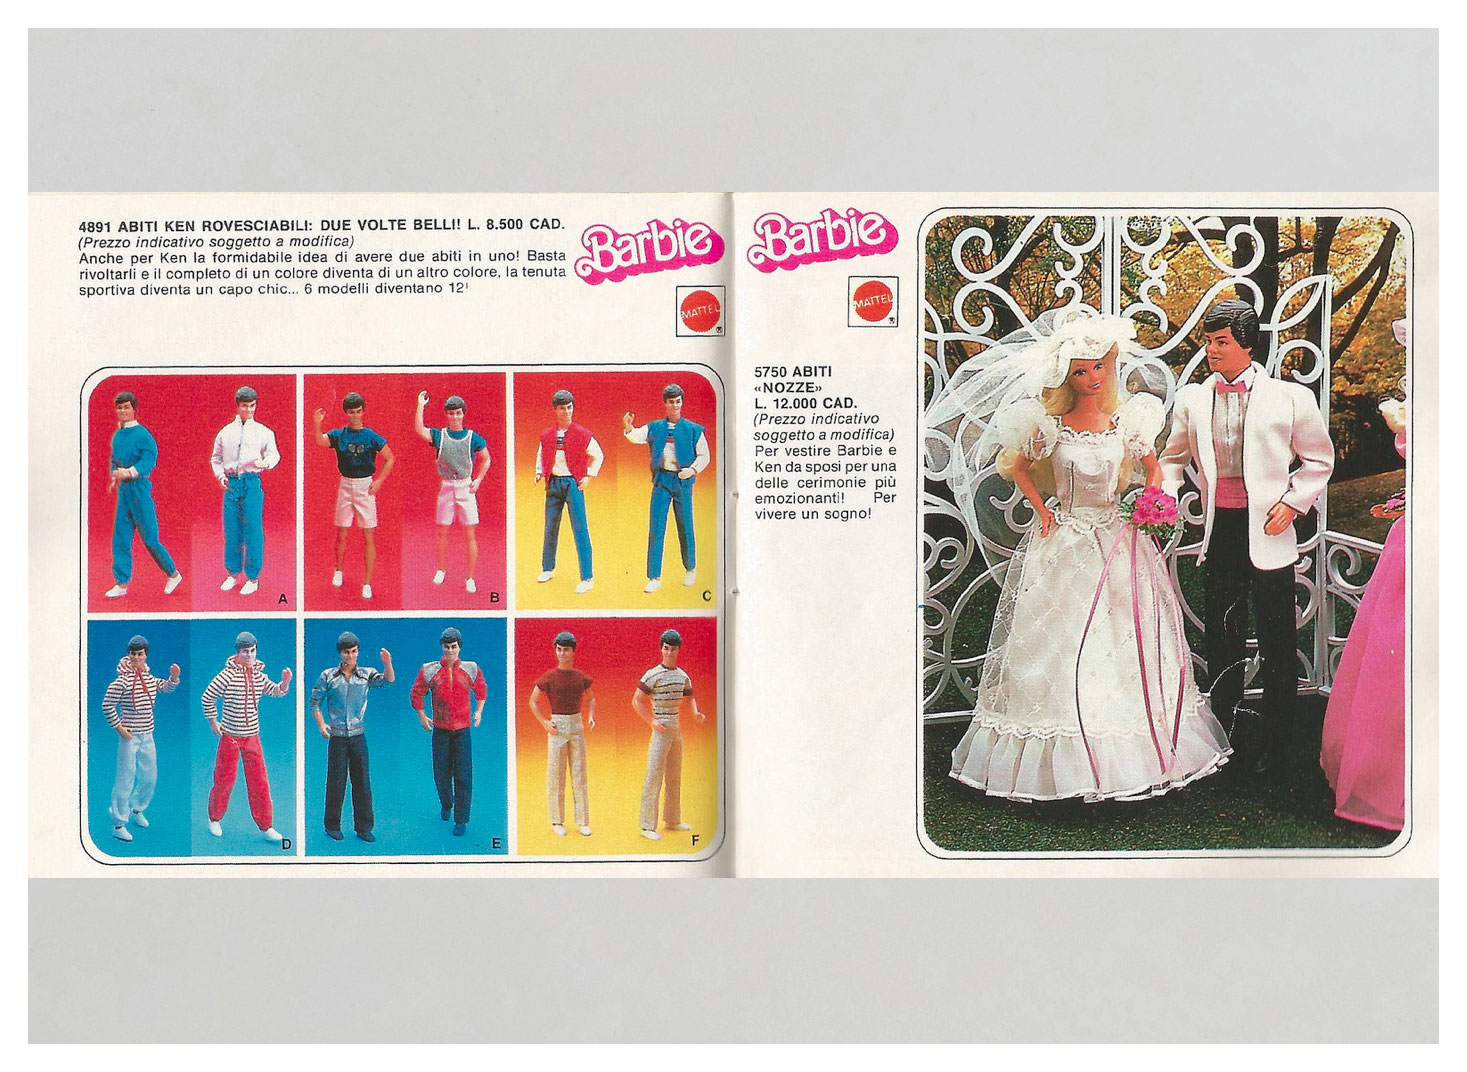 From 1985 Italian Barbie booklet